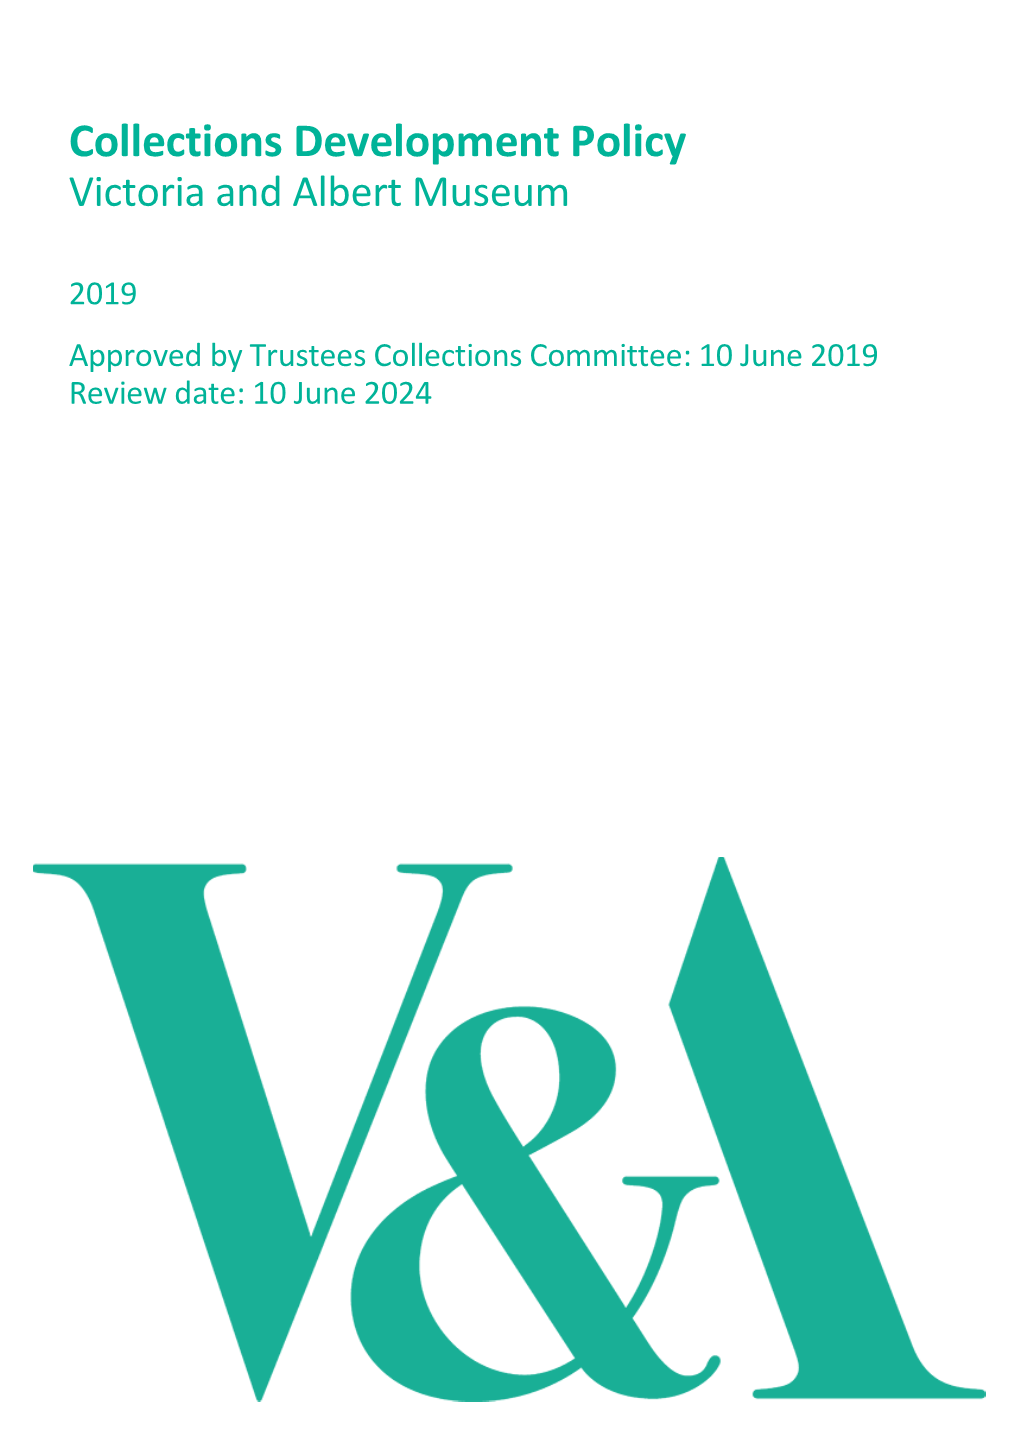 V&A's Collections Development